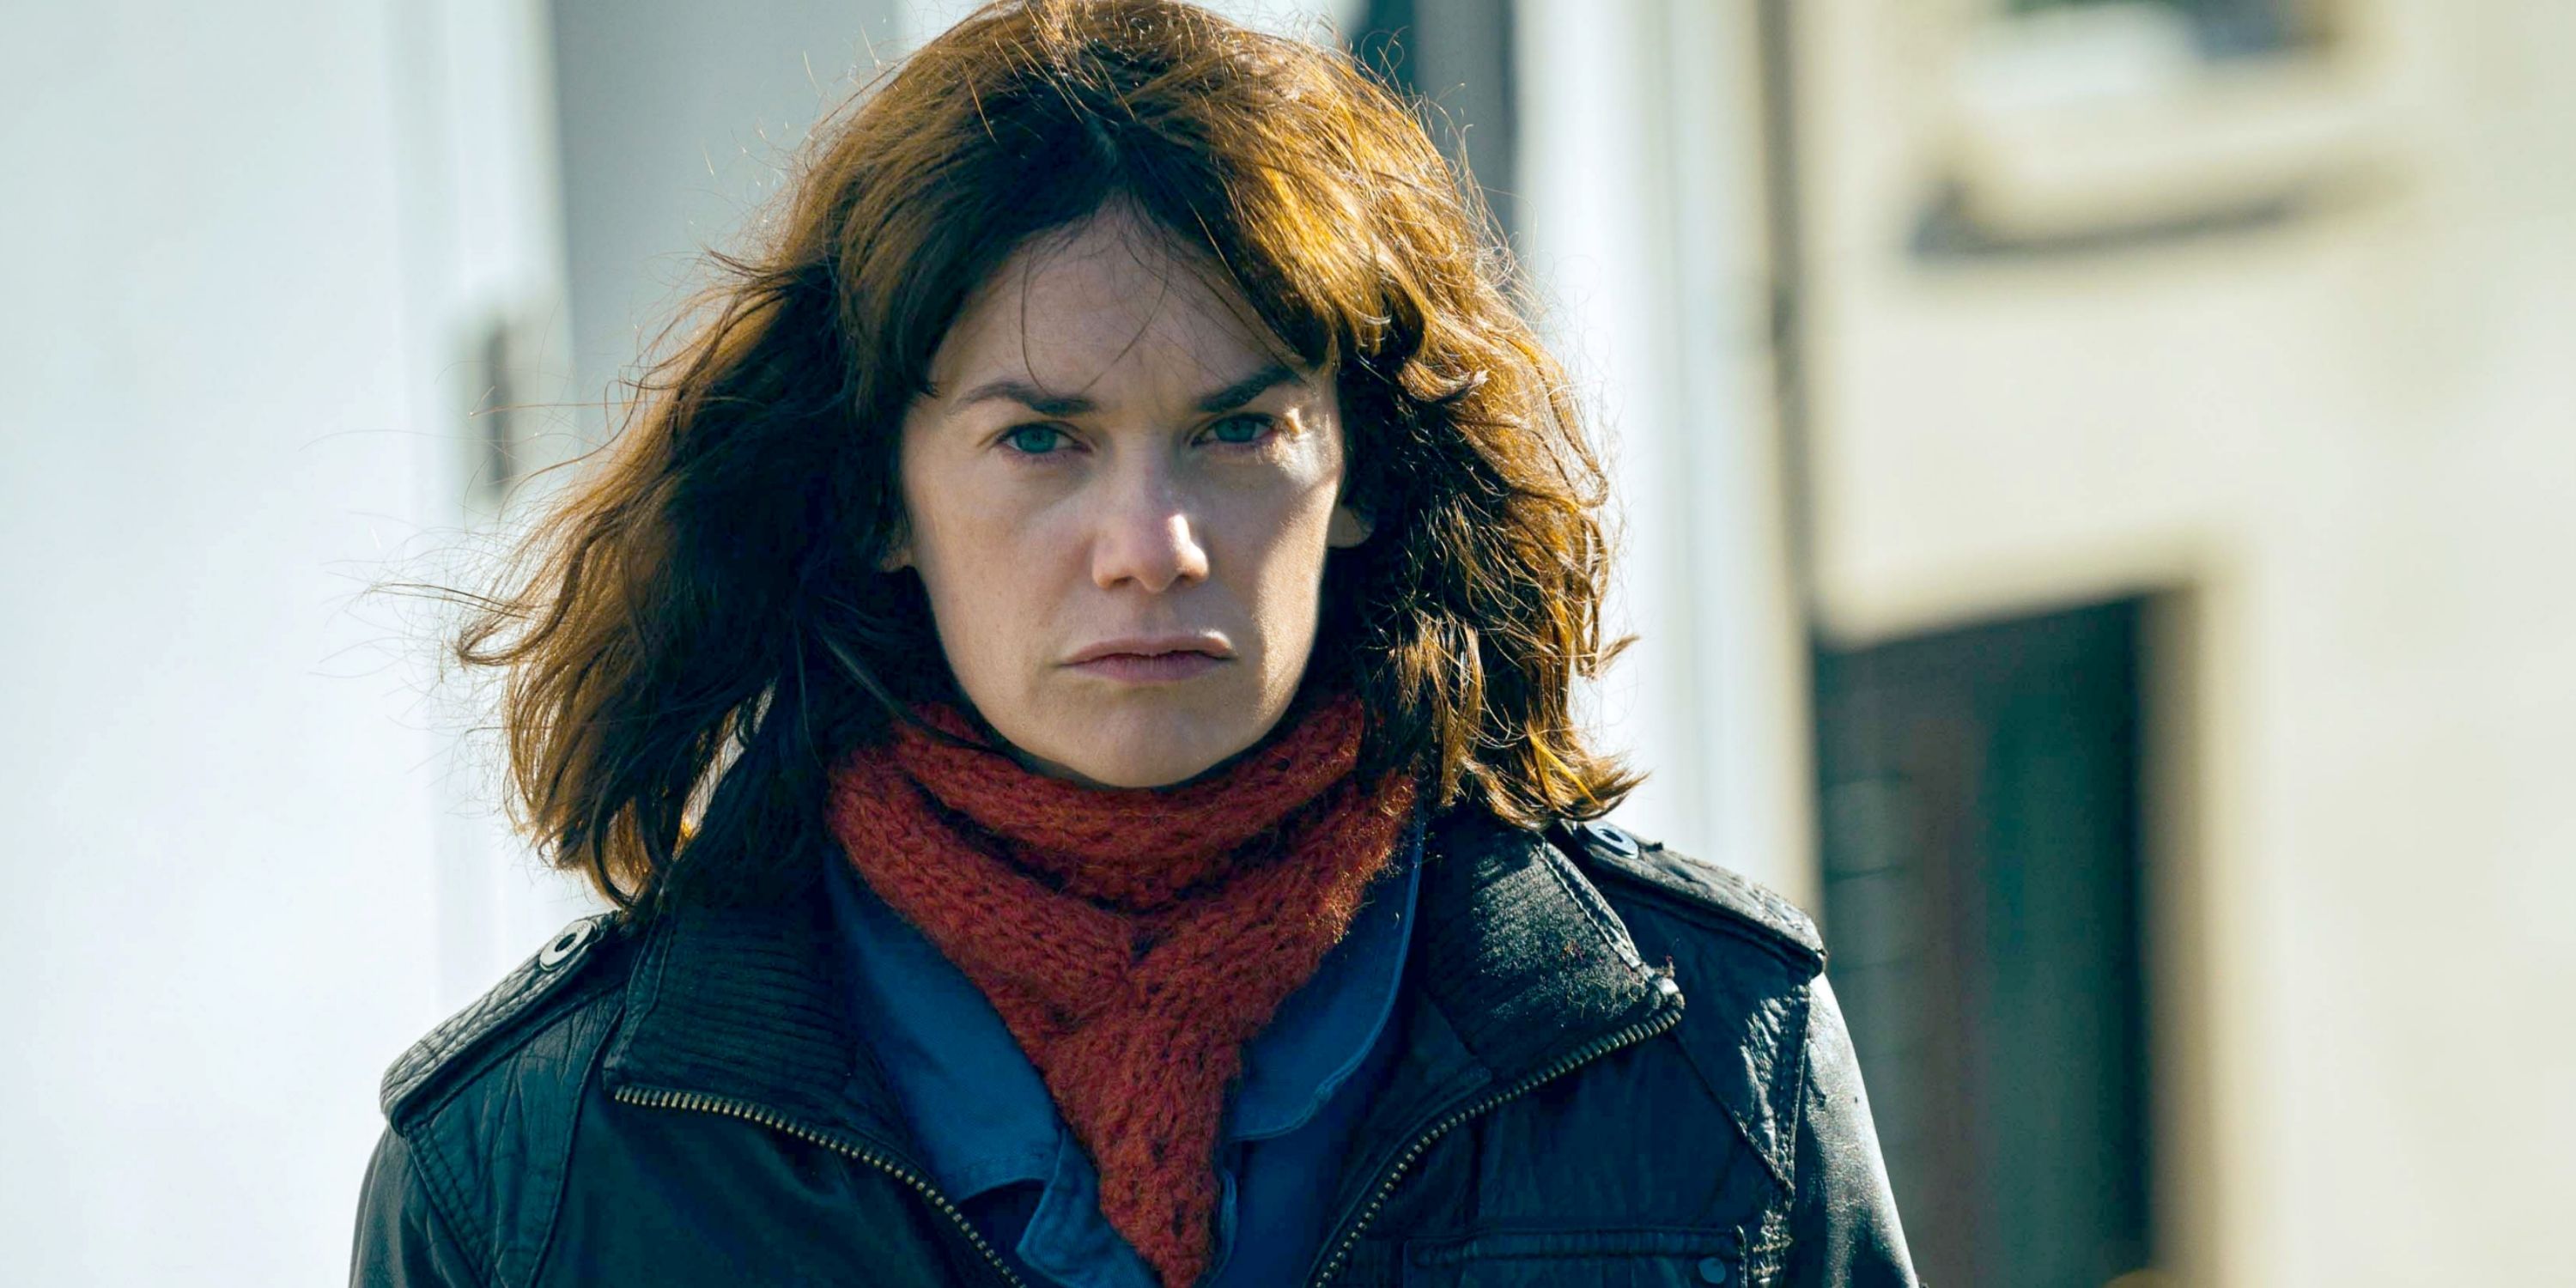 Ruth Wilson as Lorna Brady in Episode 1 of The Woman in the Wall